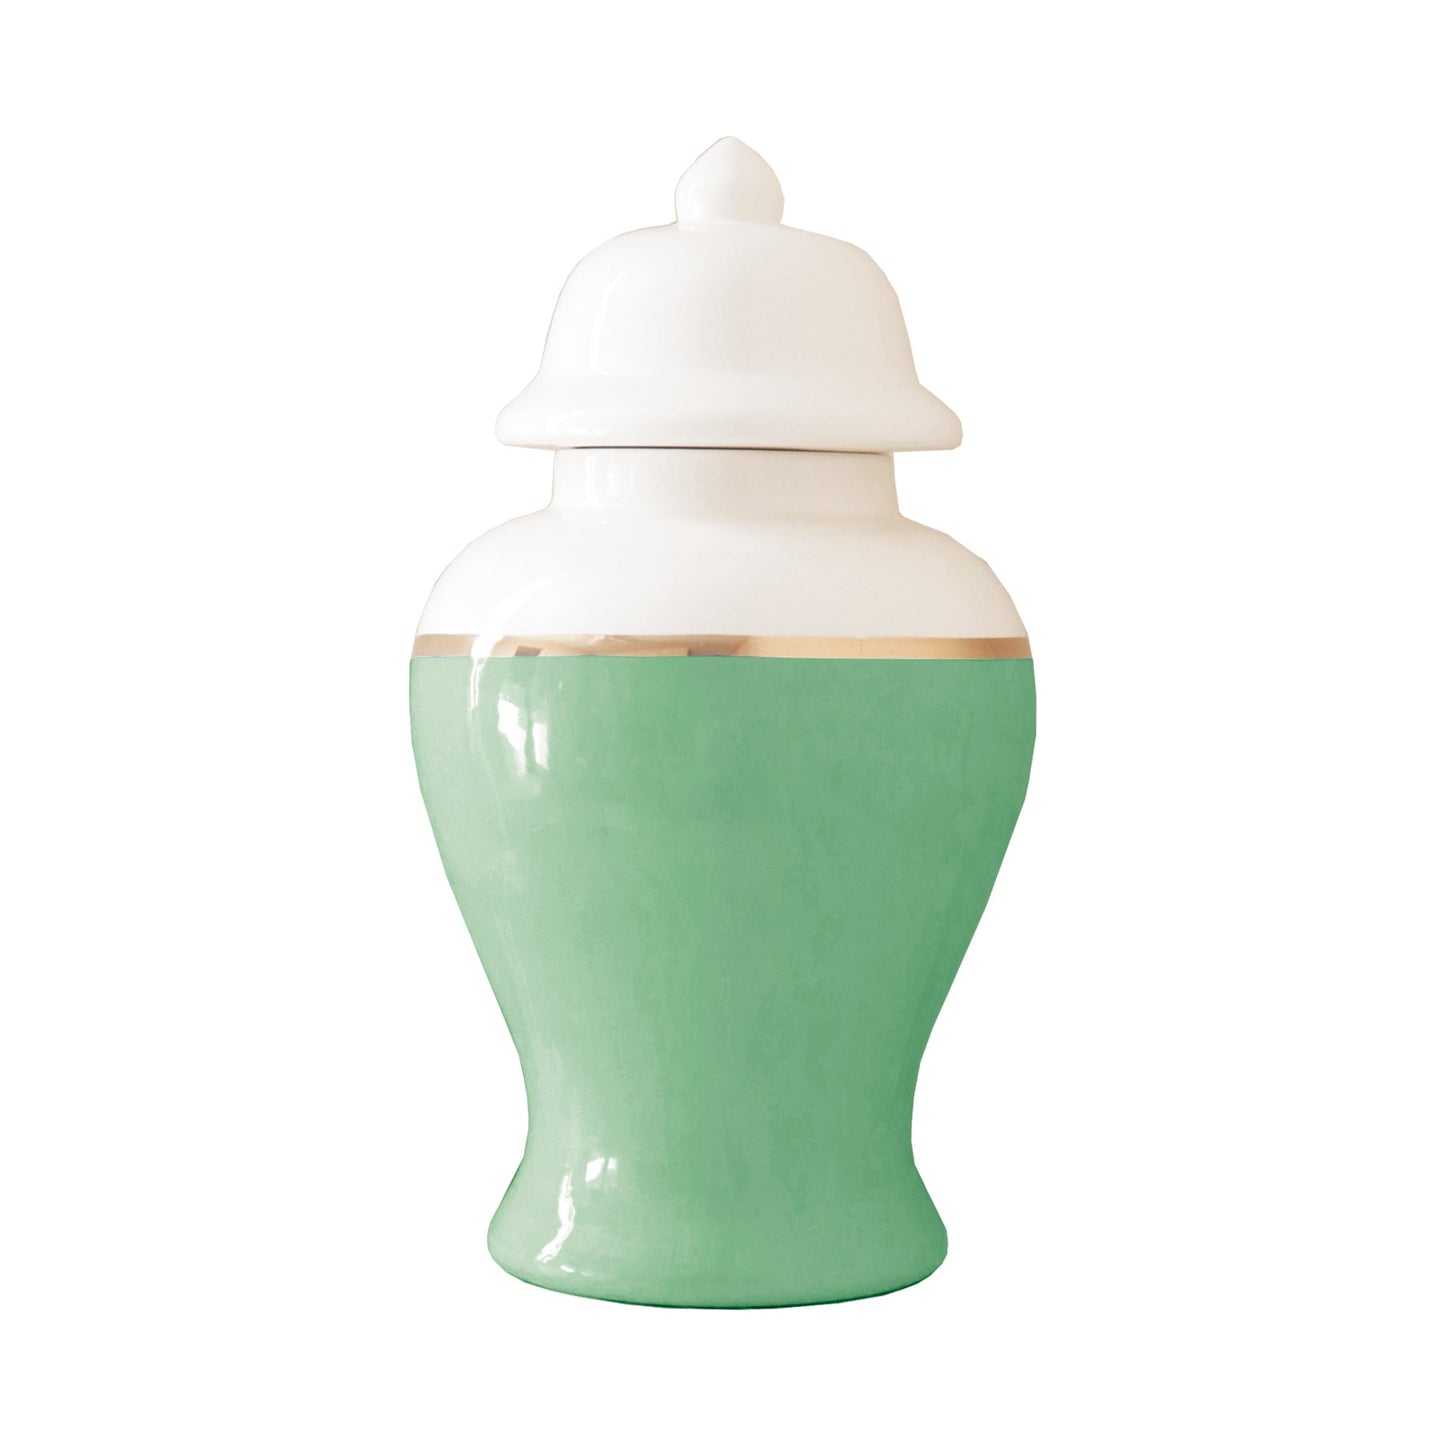 Cabbage Patch Green Color Block Ginger Jar with Gold Accent